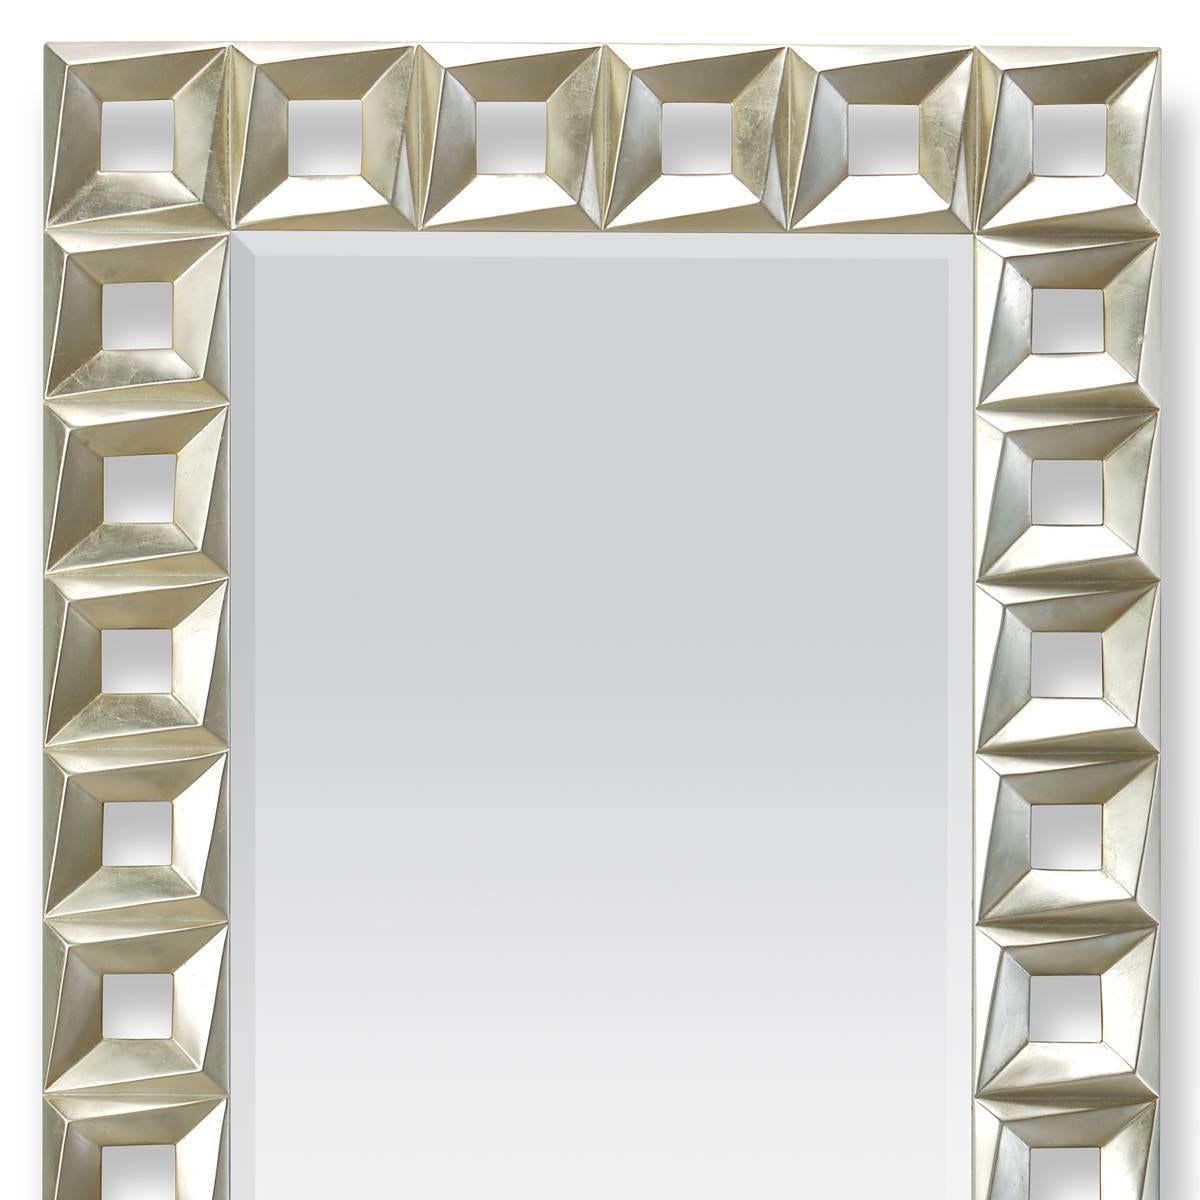 Mirror Cadrillo with structure in hand-carved solid wood
in silver finish. Also available in gold finish. With mirror
glass beveled on sides.
